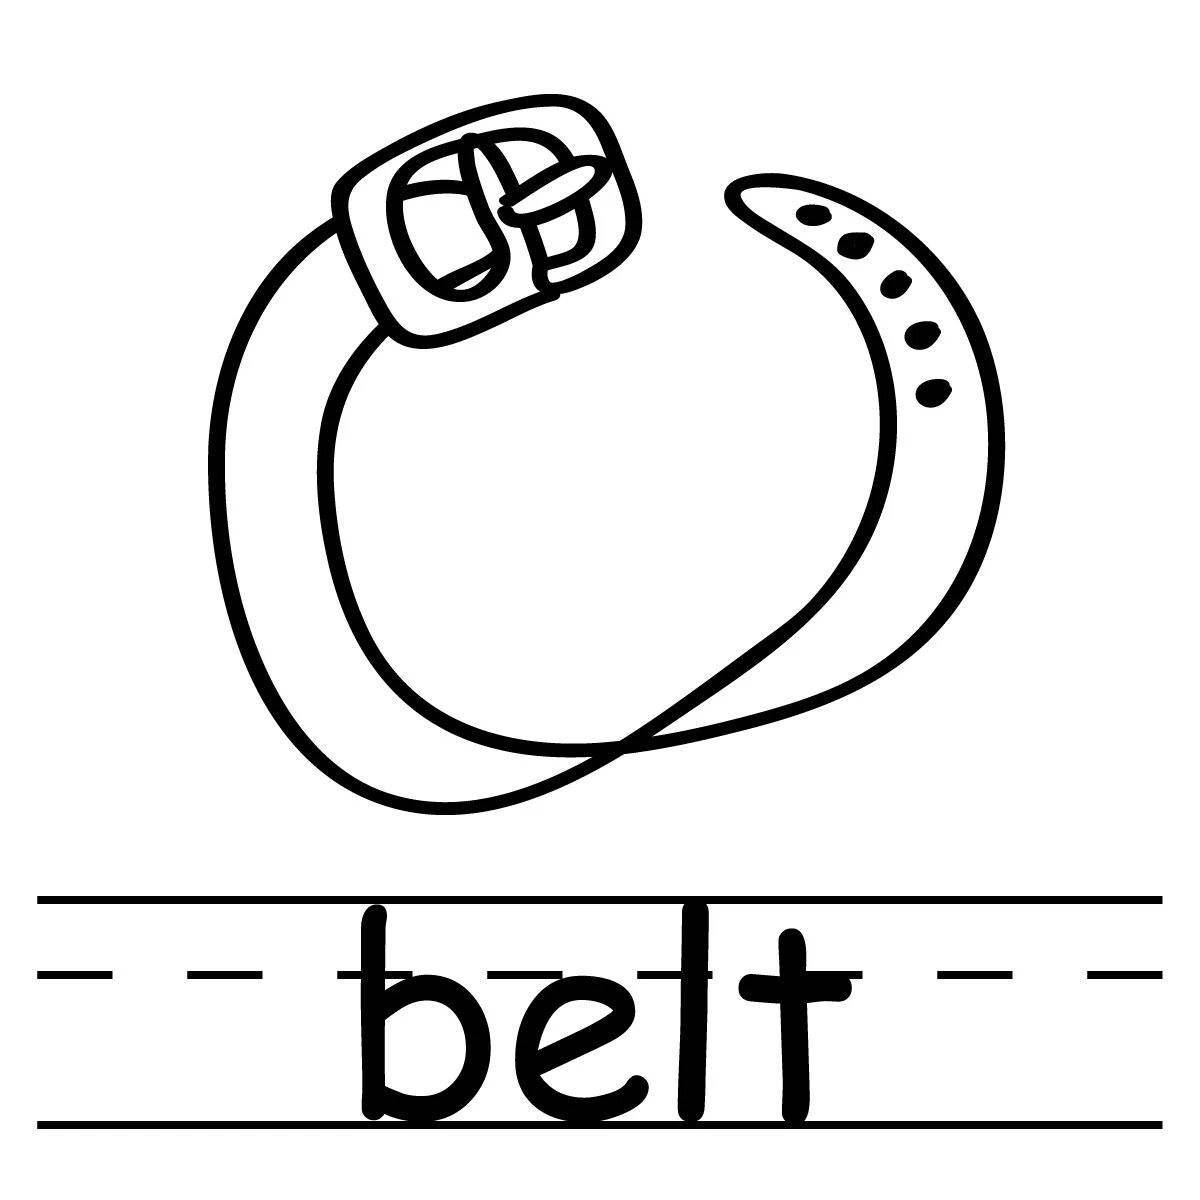 Coloring page fun belt for kids